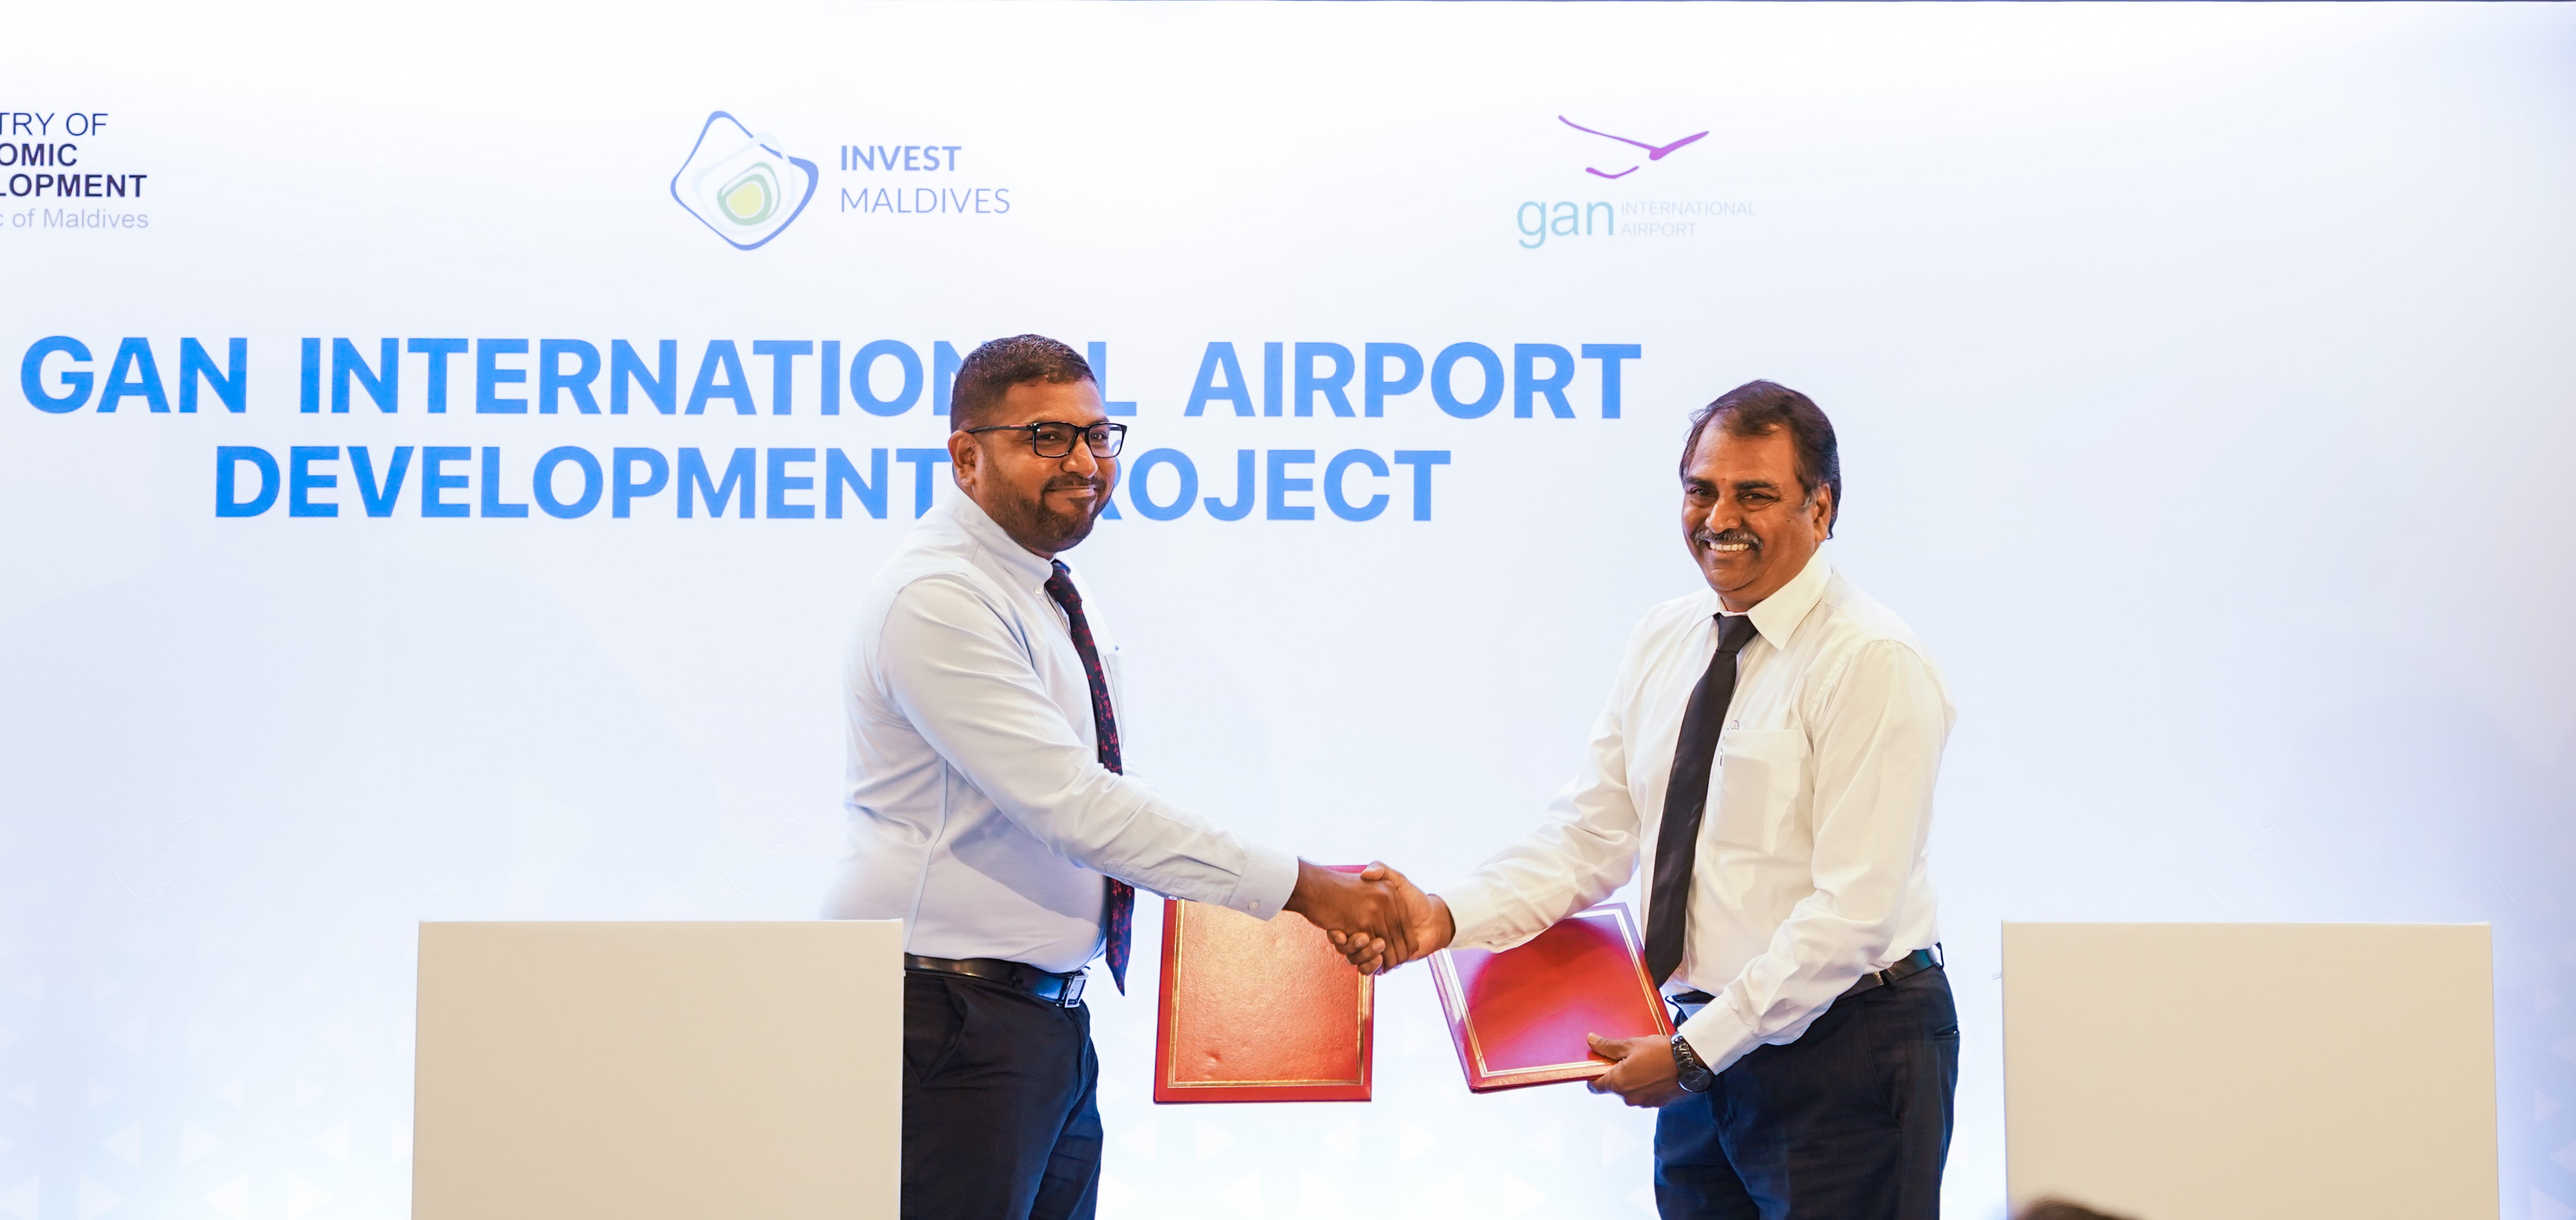 Chennai’s Renaatus Gets US$ 29M Contract from Maldives to Expand Gan International Airport